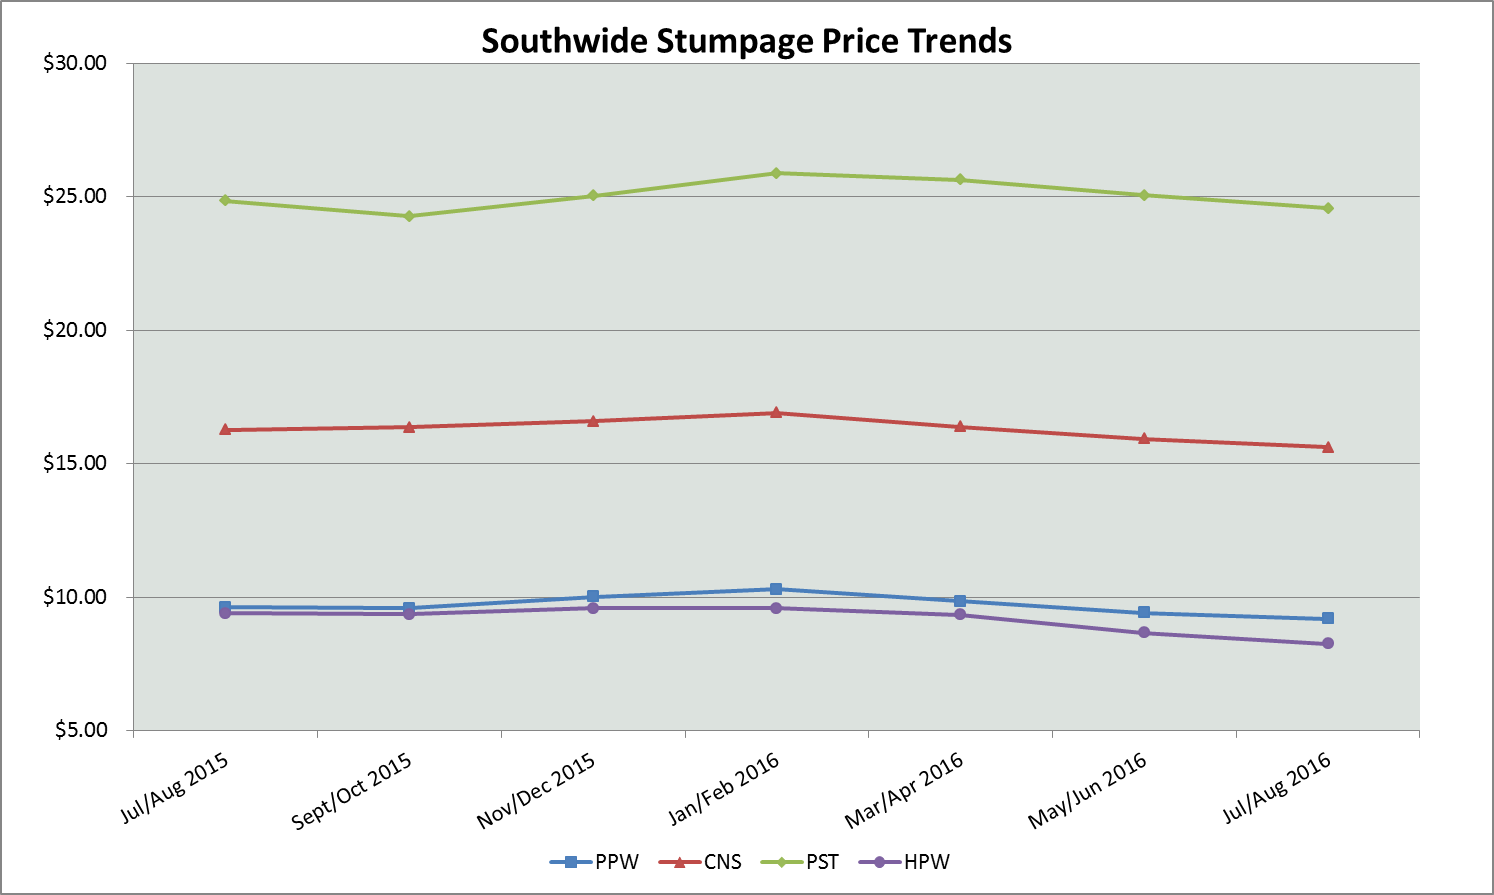 US South Stumpage Price Trends by Region: July/August 2016